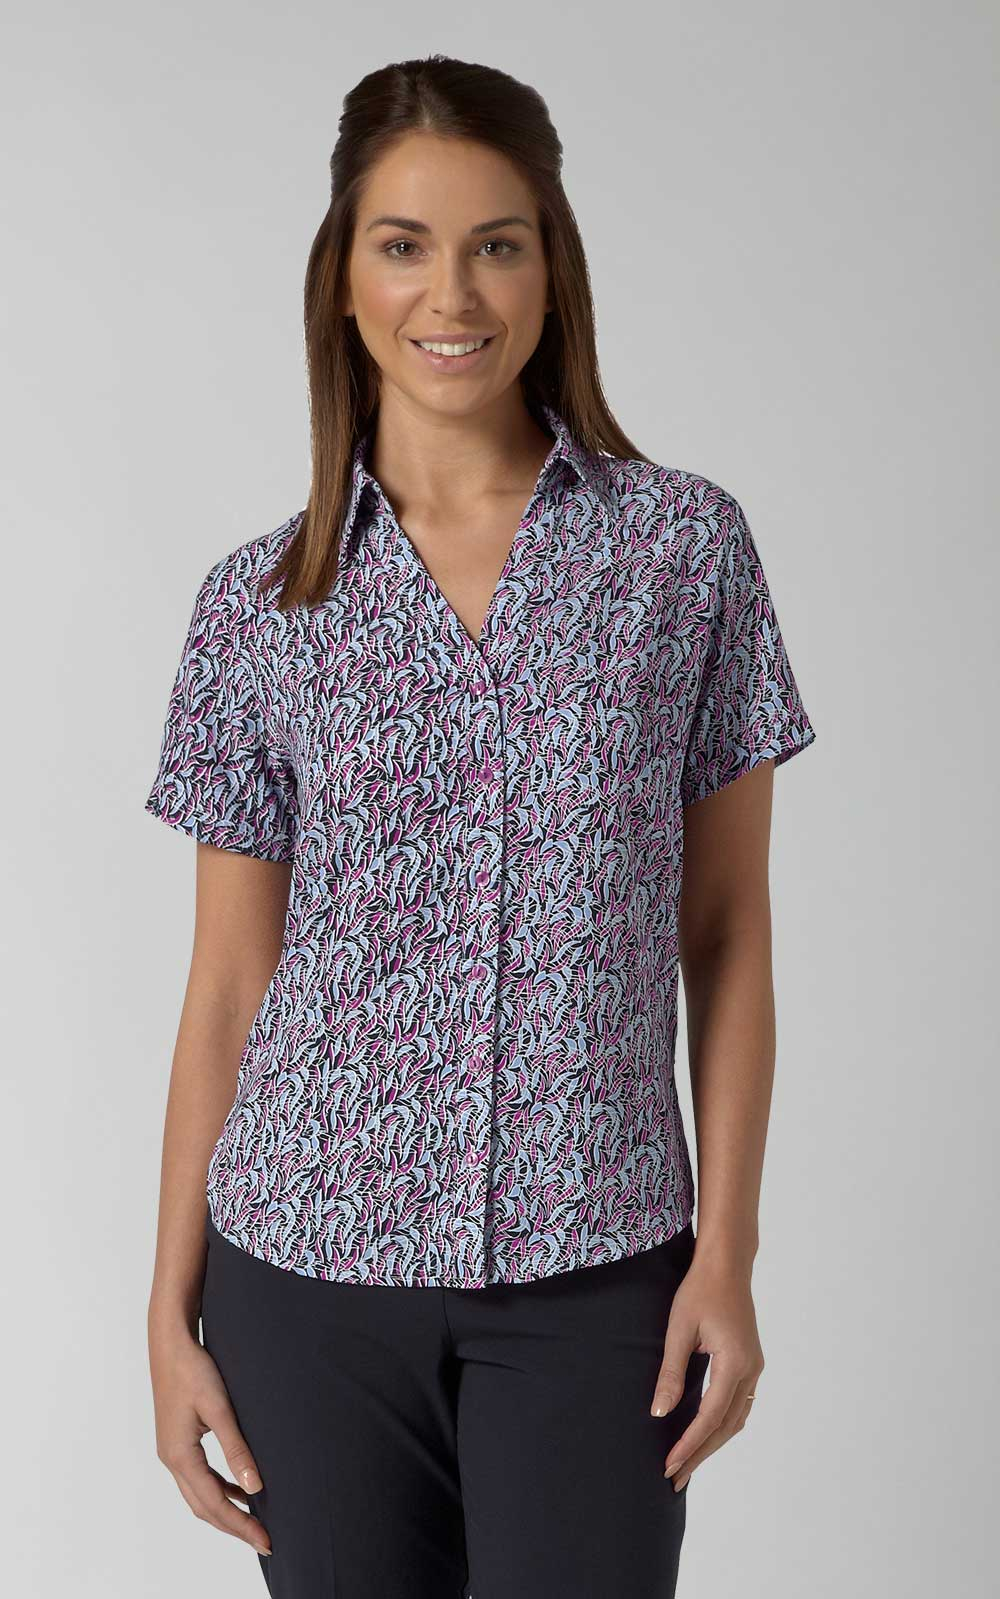 Vortex Designs WILLOW Printed Soft Touch Crepe Blouse-0